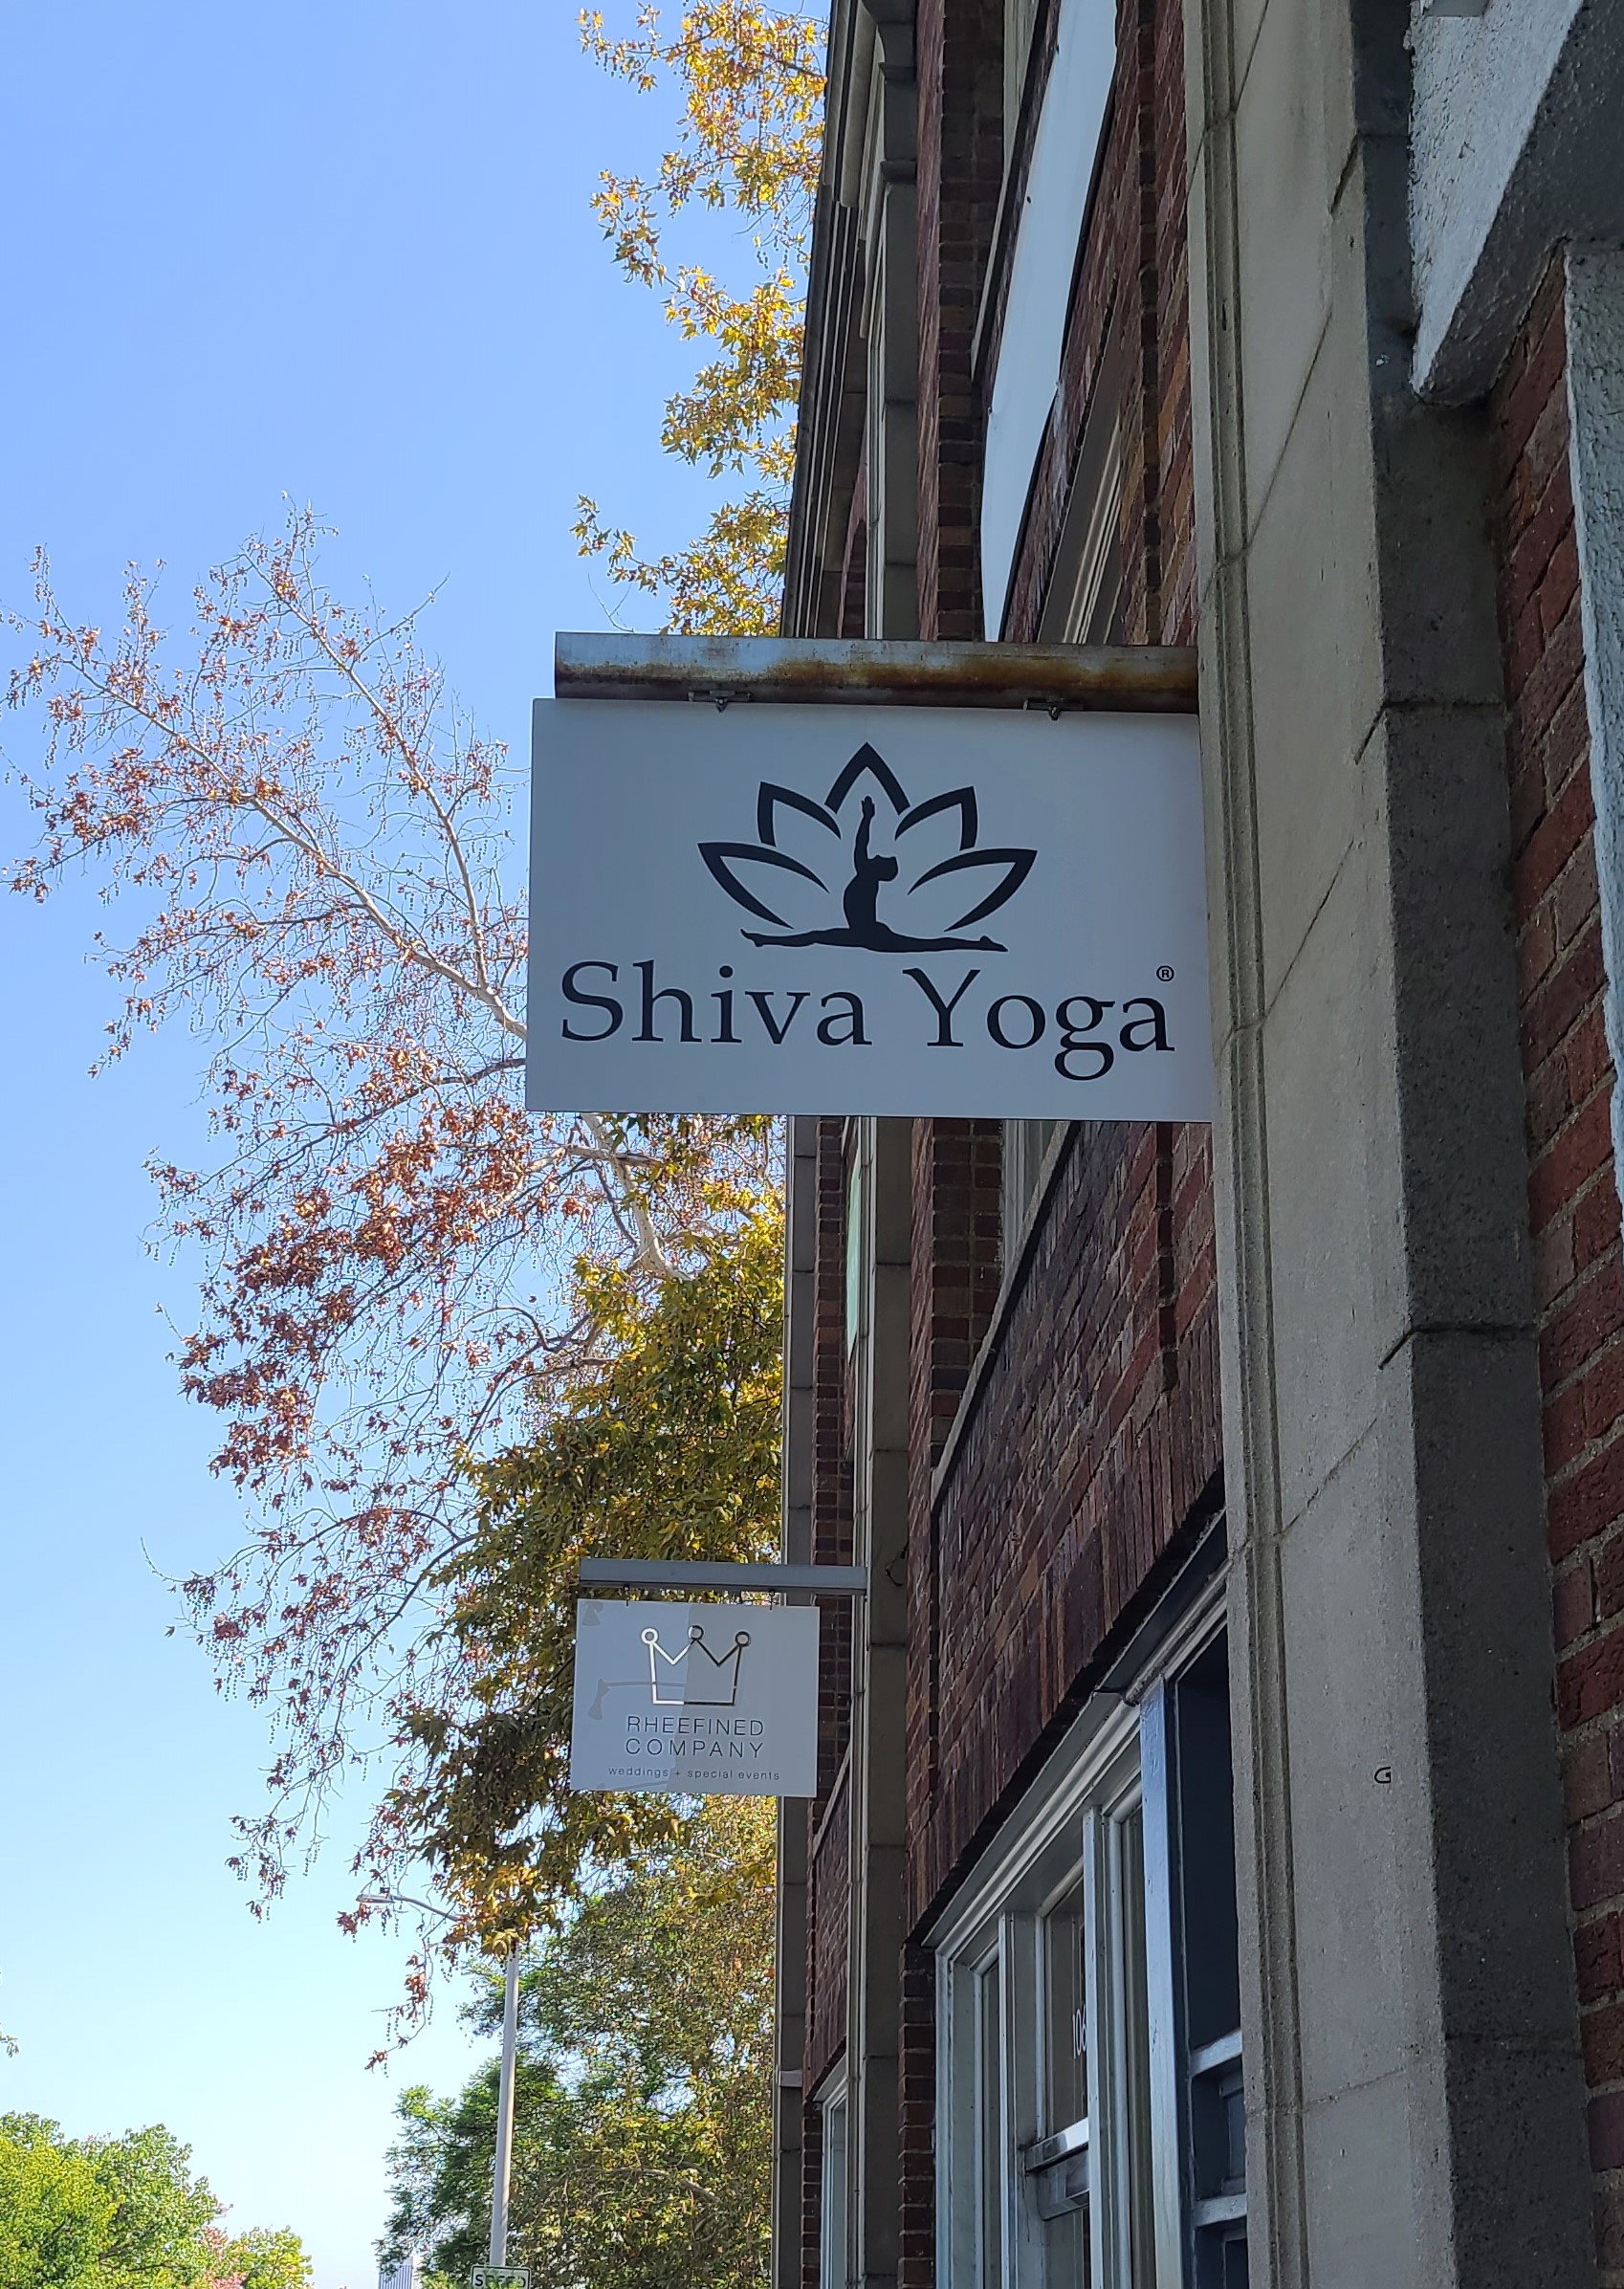 This is the blade sign we fabricated and installed for Shiva Yoga's West Hollywood studio.